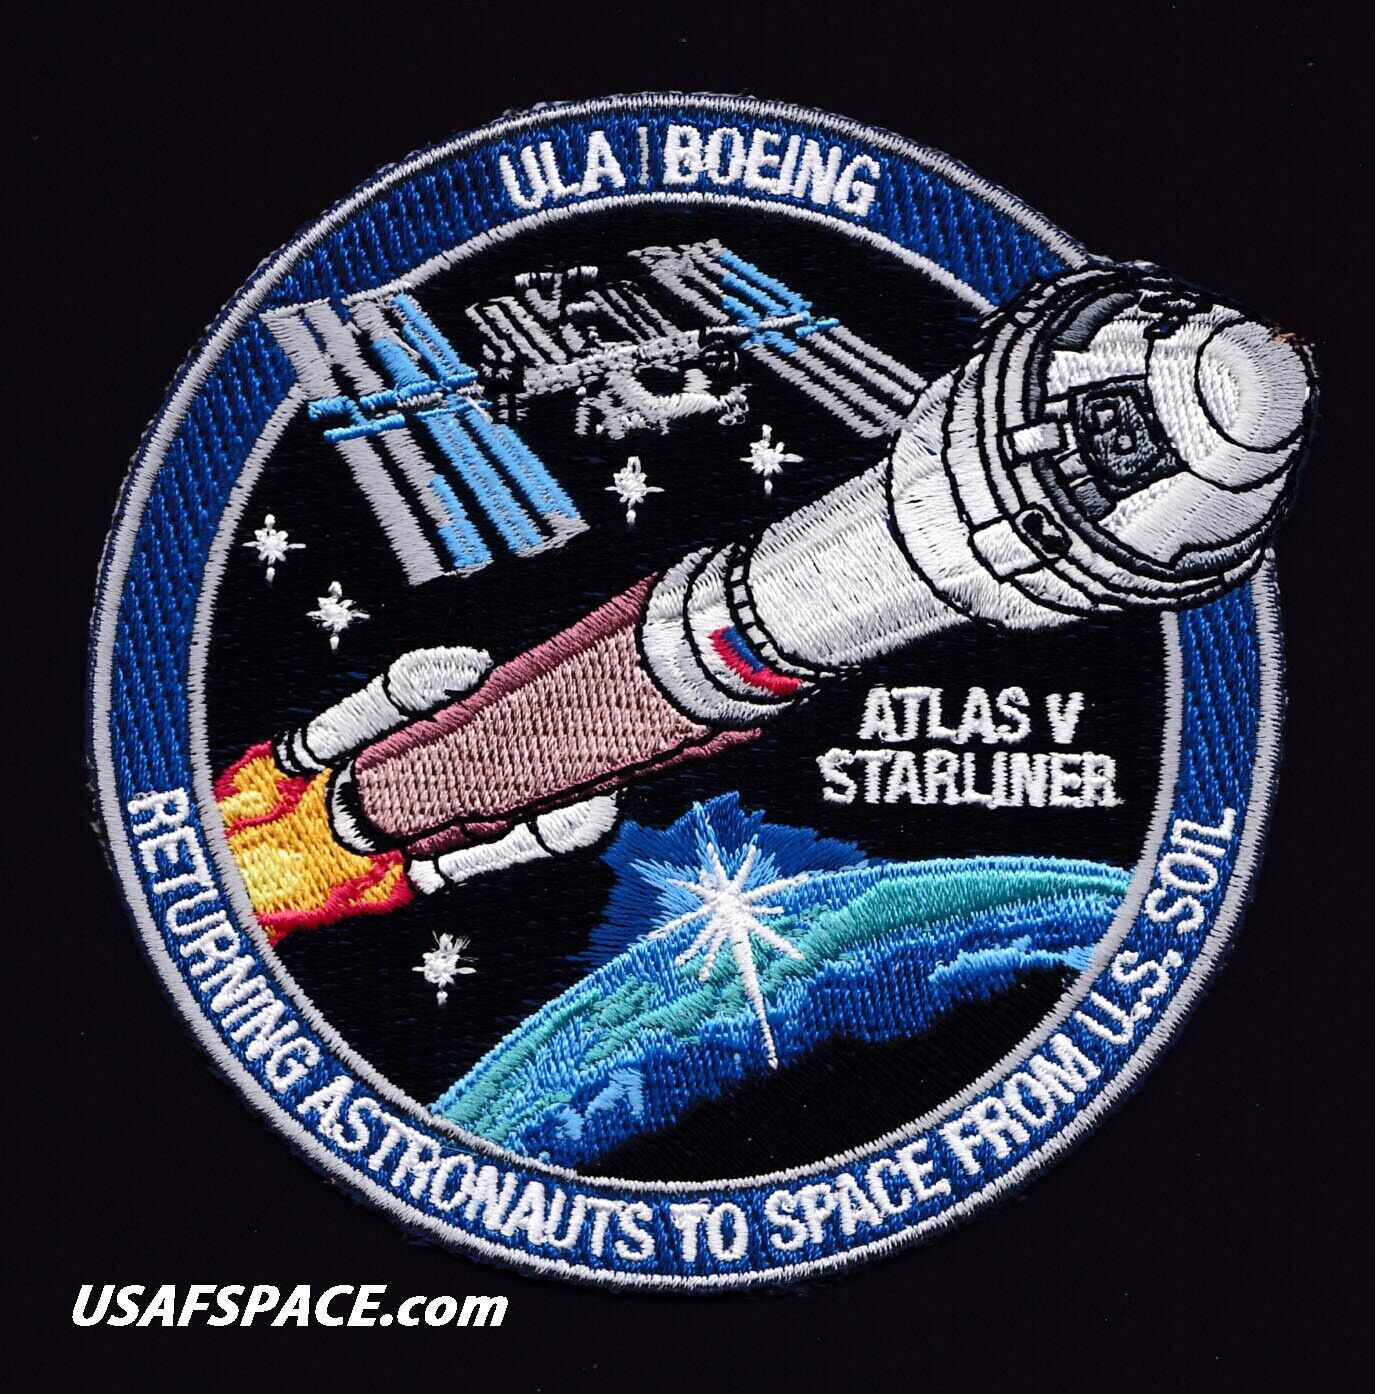 Authentic ULA - BOEING STARLINER - ATLAS V Launch - NASA ISS USA SPACE PATCH 